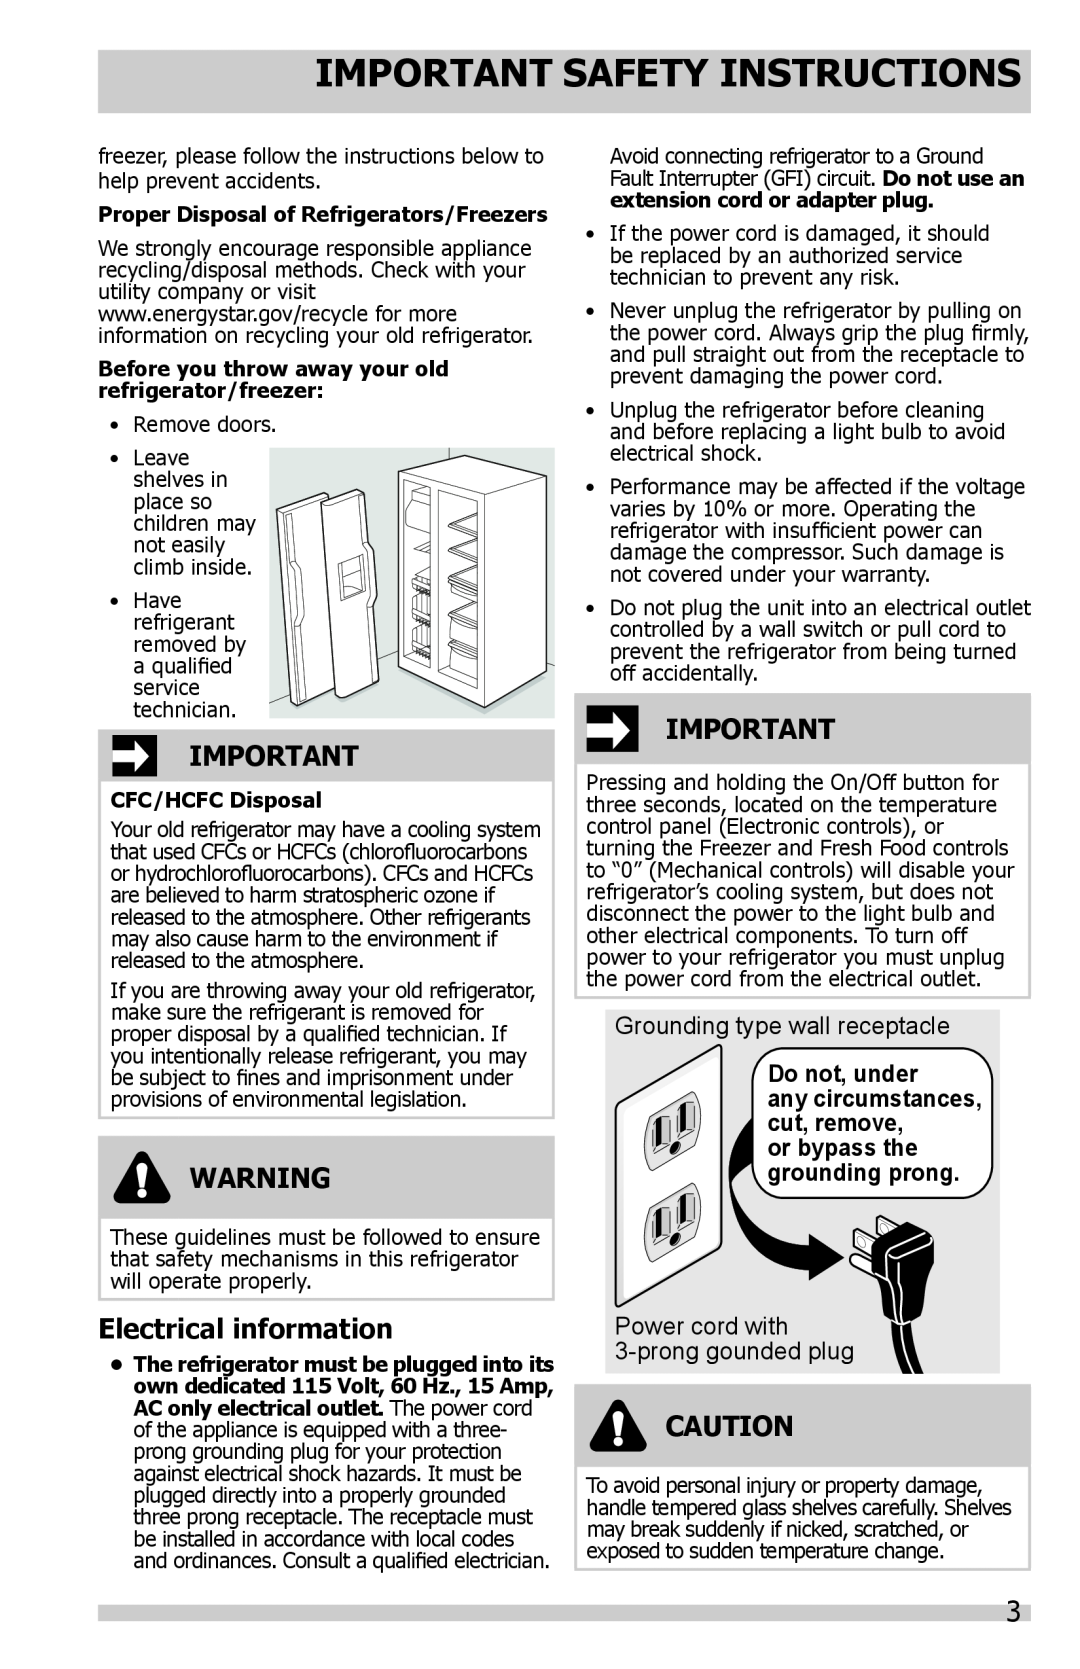 Frigidaire FFHS2622 Electrical information, Do not, under, or bypass the grounding prong, Important Safety Instructions 